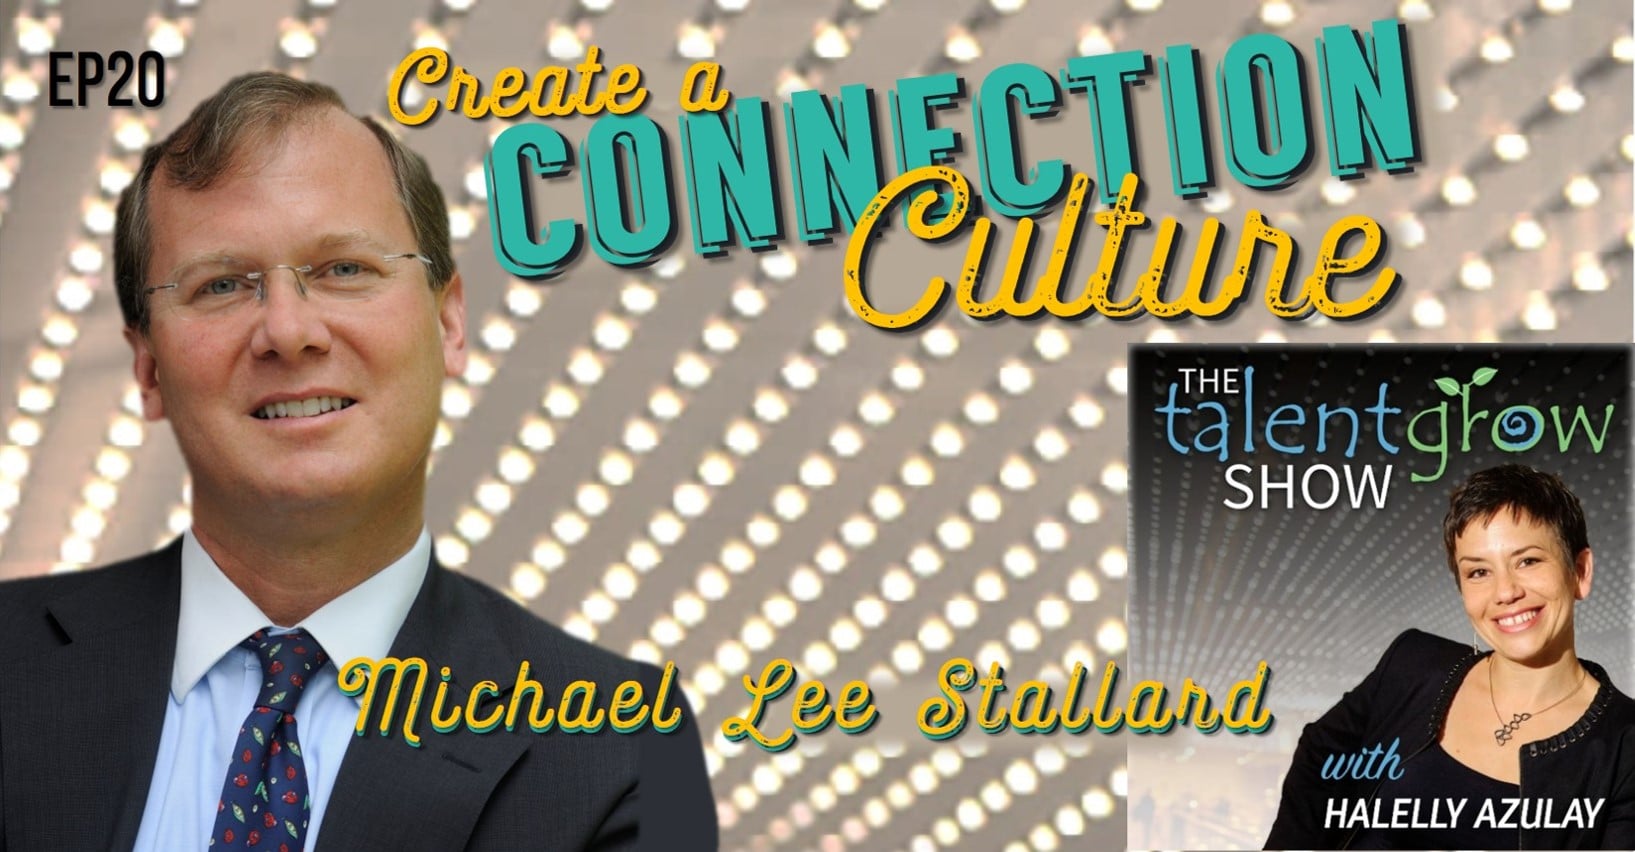 Ep20: Create a Connection Culture with Michael Lee Stallard ...